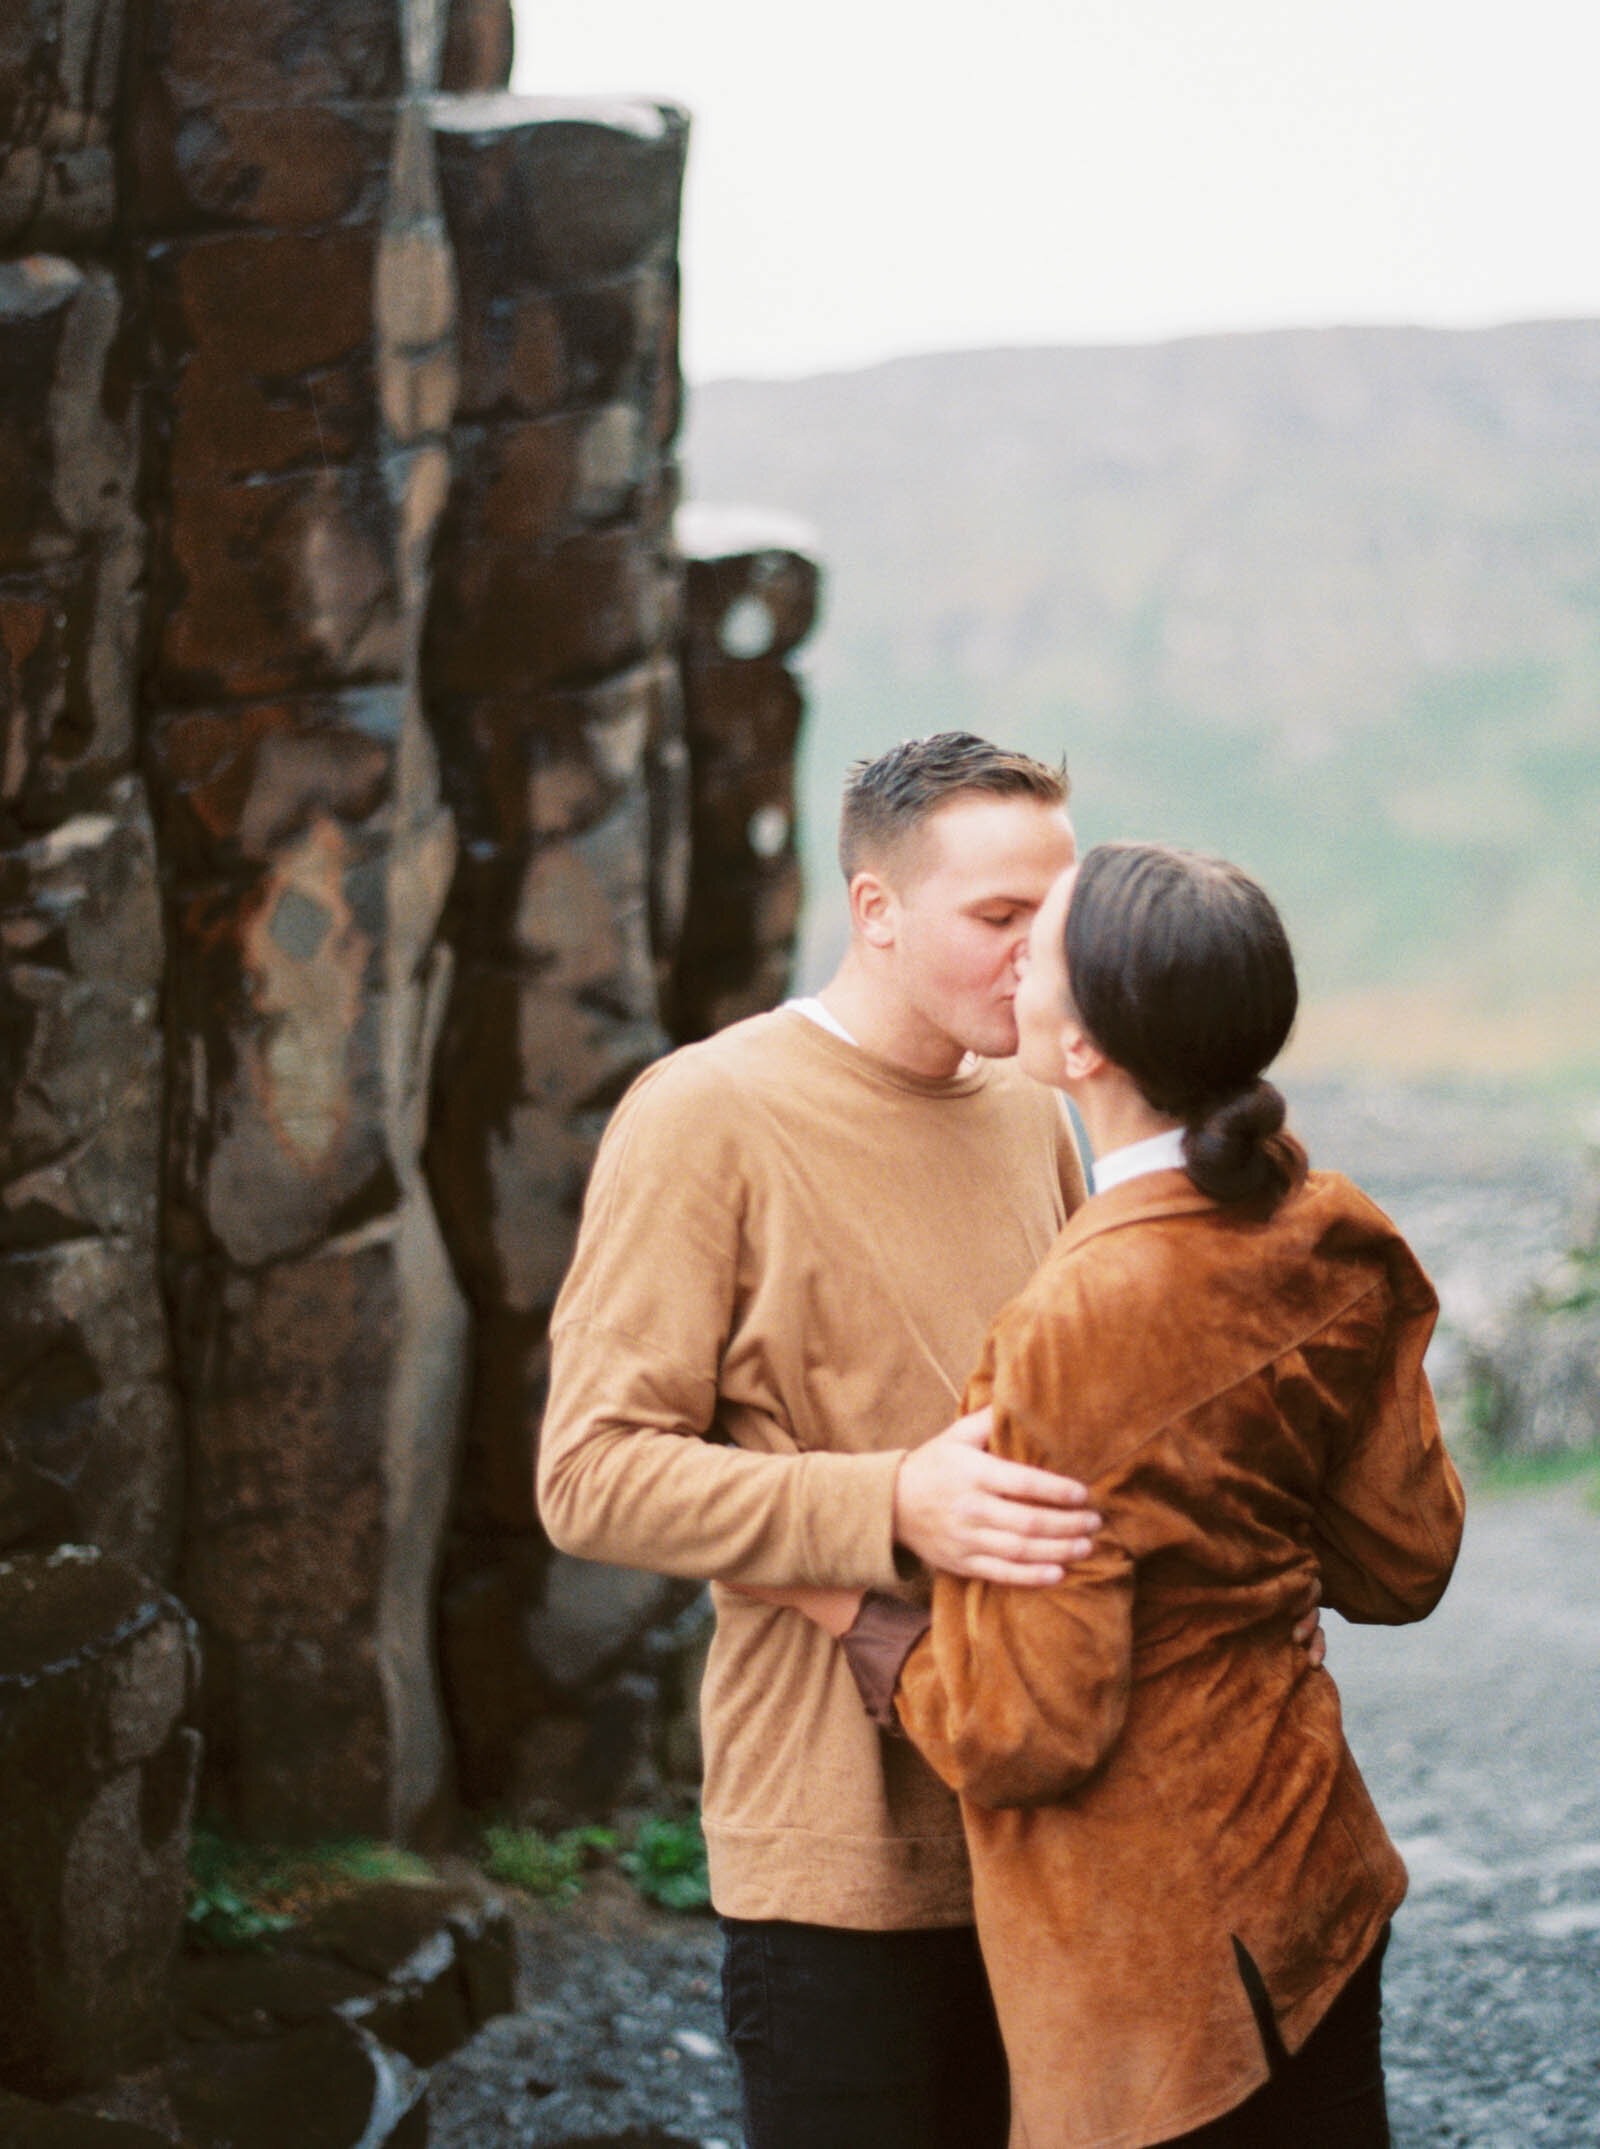 Giants-Causeway-Engagement-session-Krmorenophoto-17